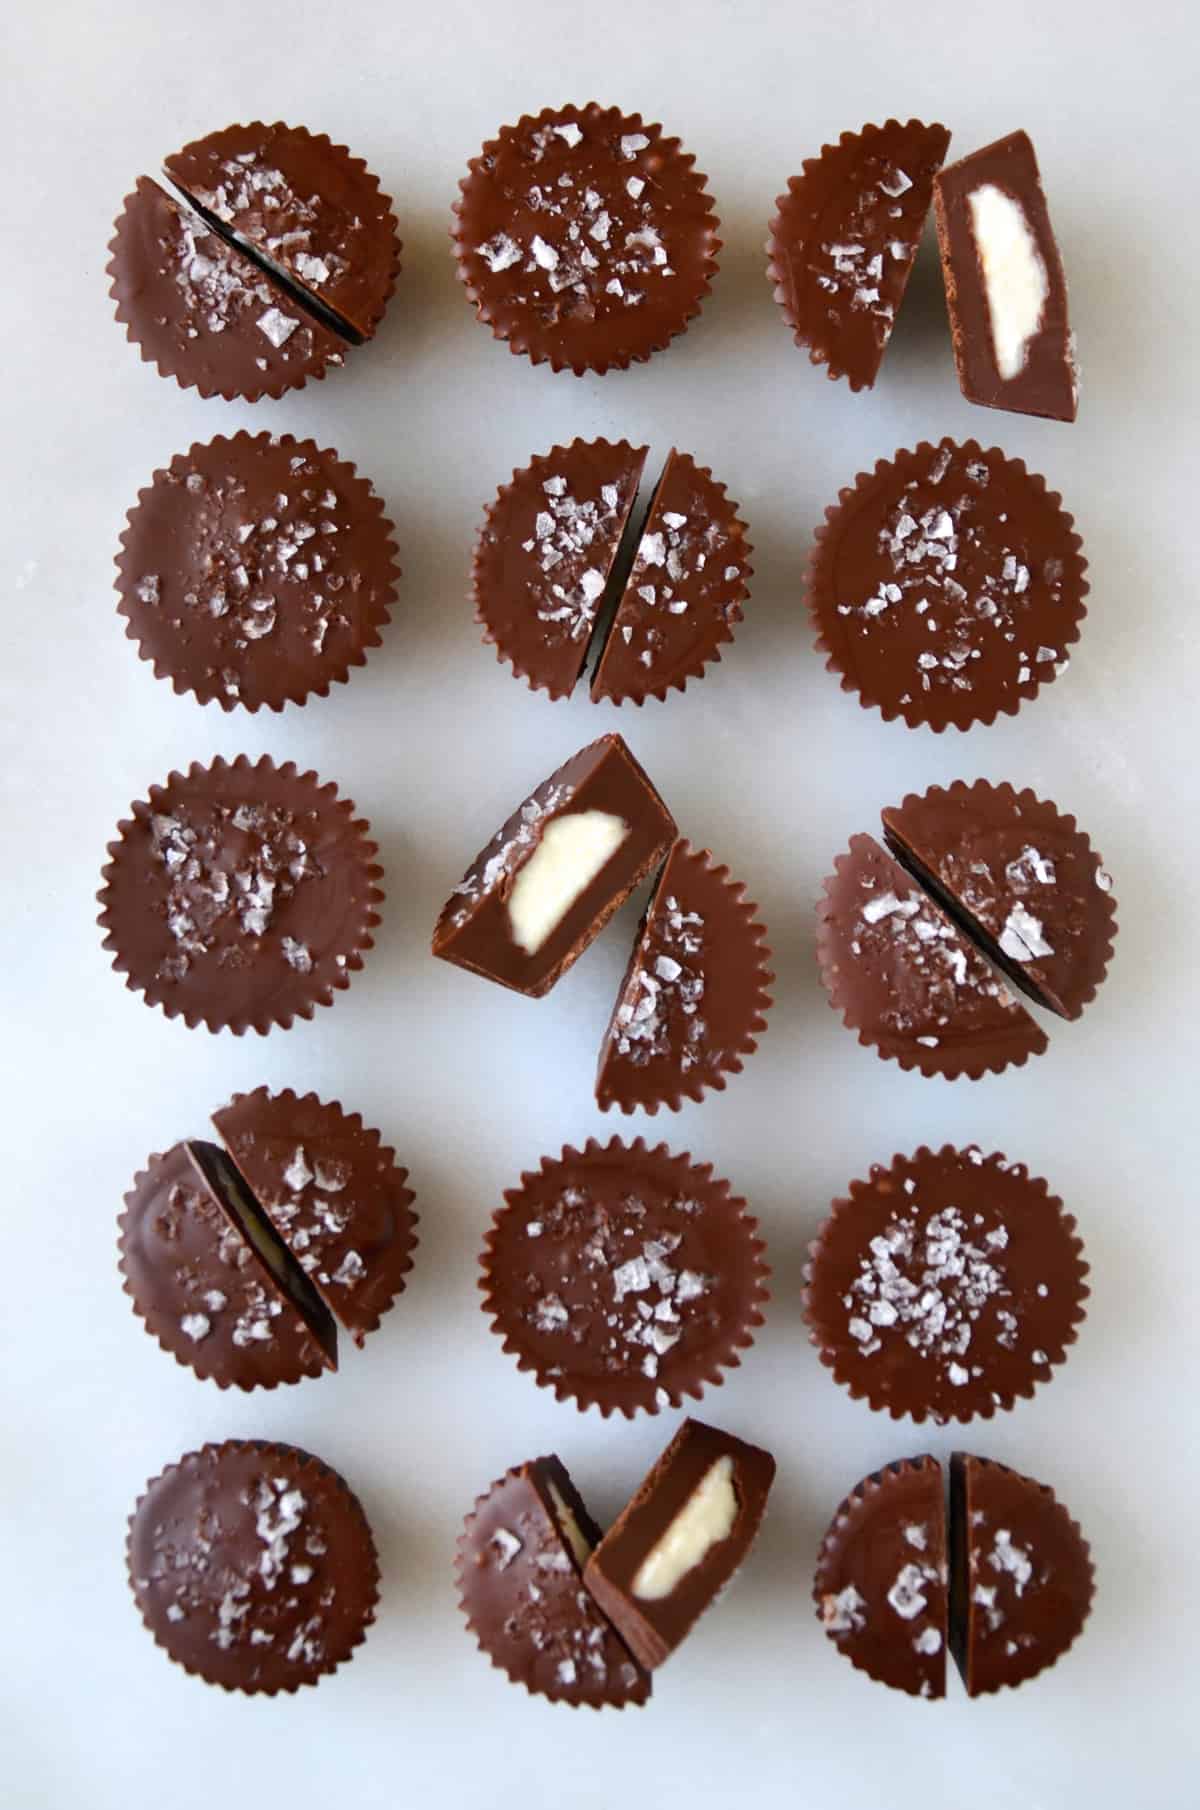 Three rows of chocolate cheesecake cups topped with large-flake sea salt.